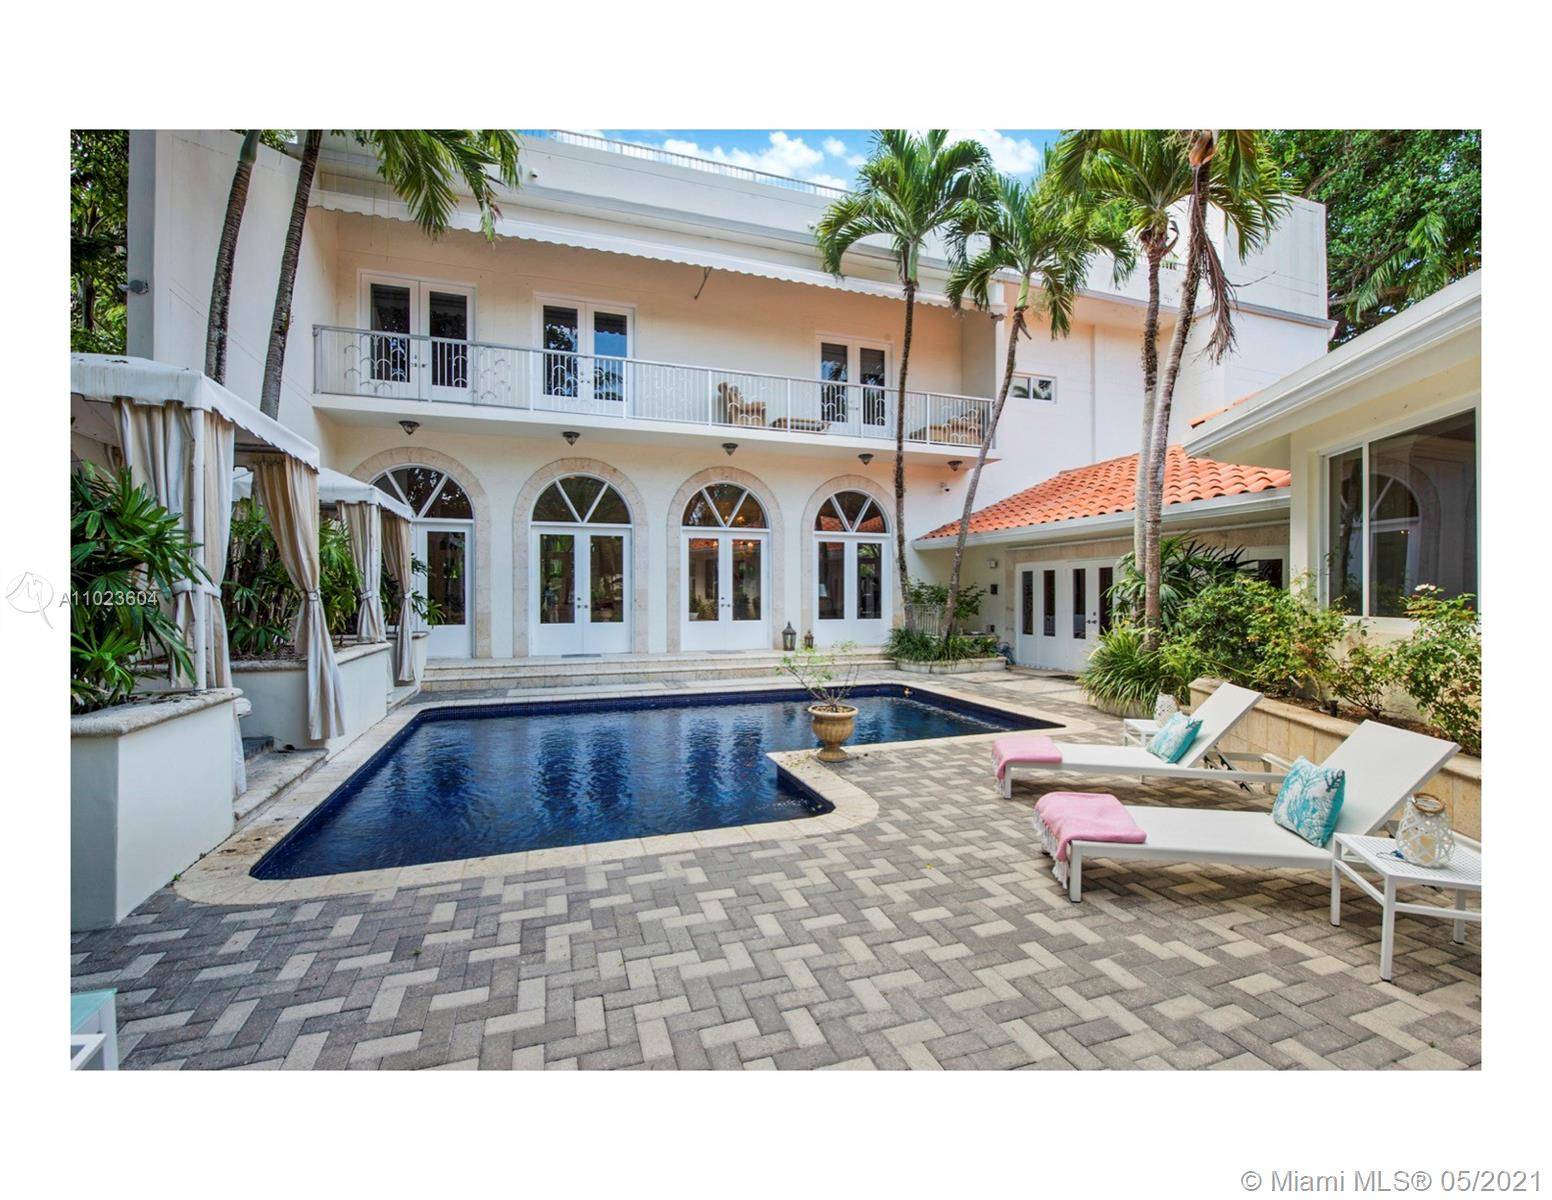 Elegant, walled estate perched high on coral ridge with lush grounds.